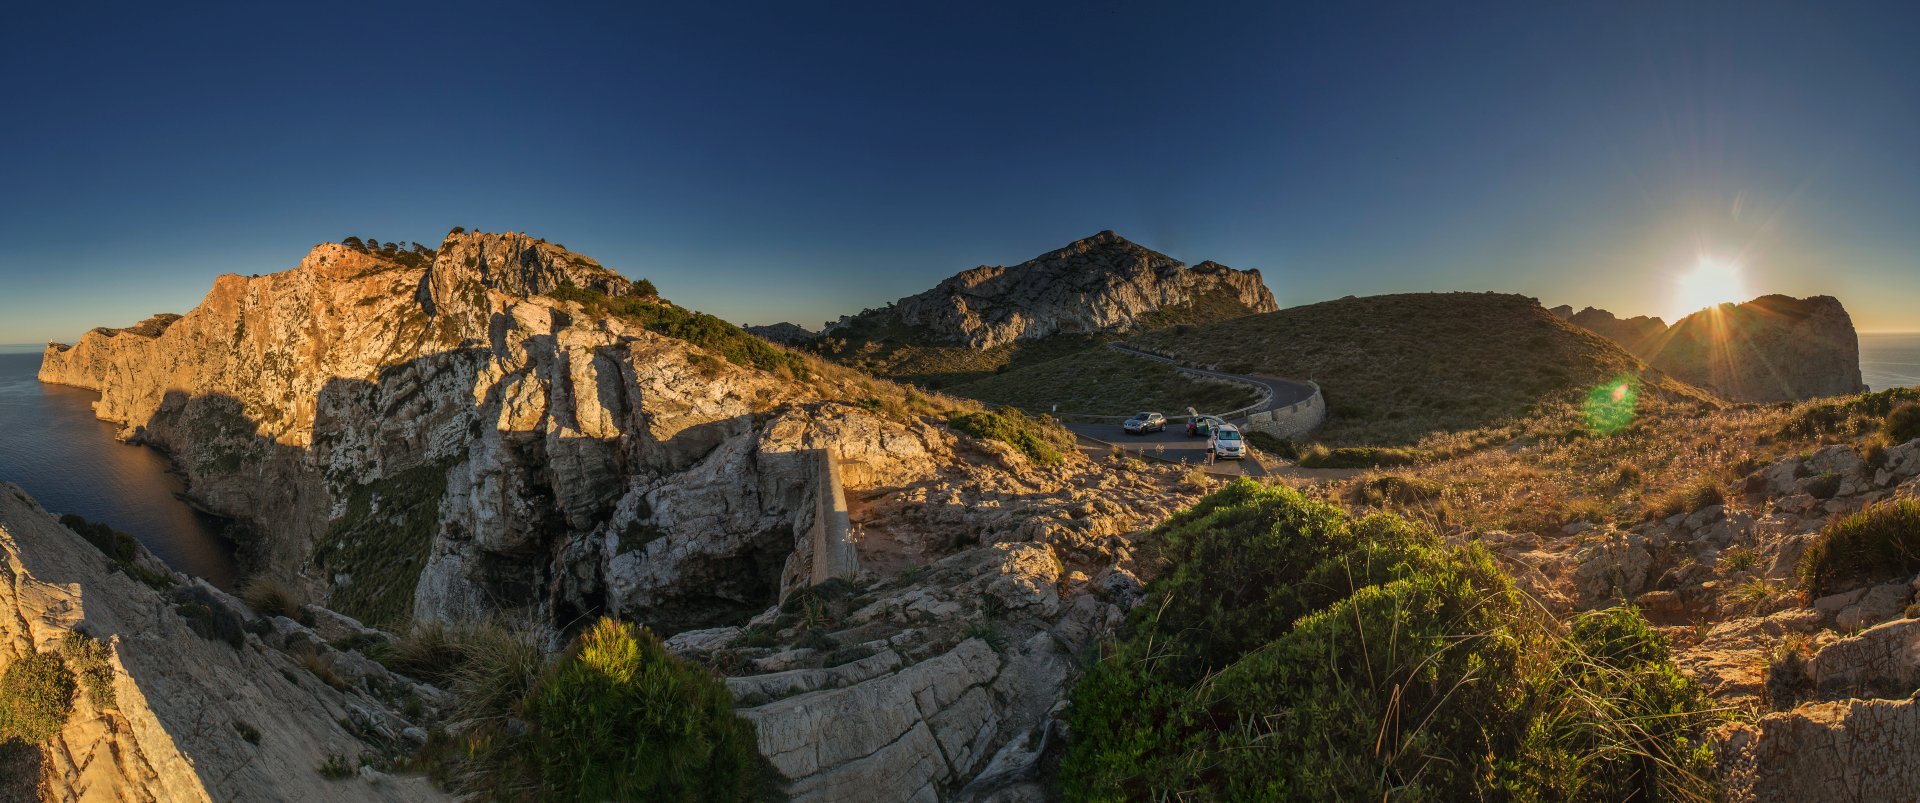 Somewhere at the Formentor peninsula with Roca Blanca in the center